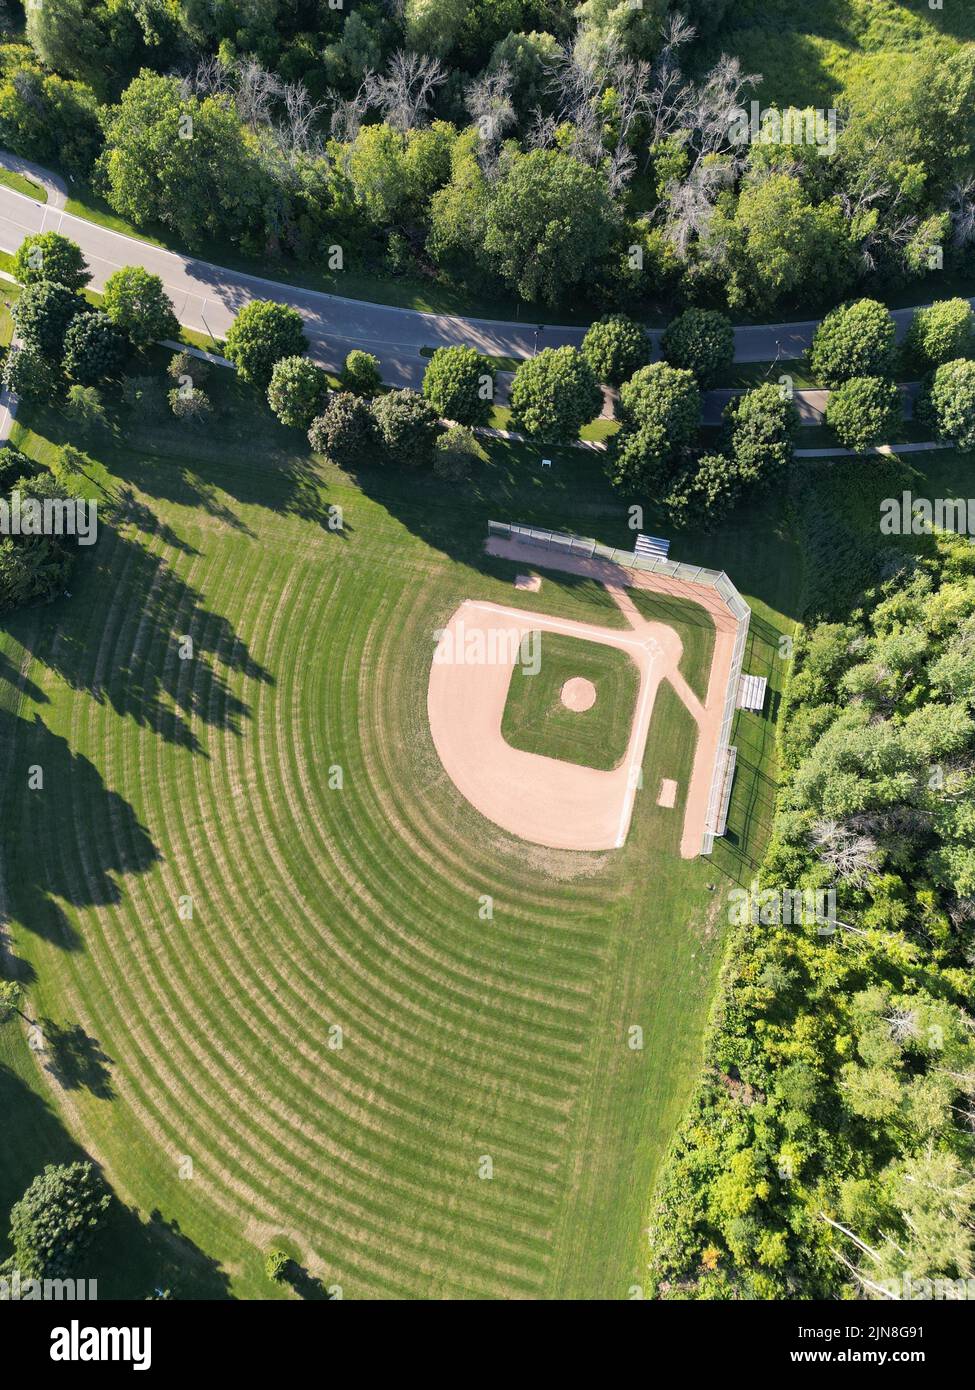 An aerial shot of the Delaware Park Baseball Diamonds in Buffalo city surrounded by lush trees Stock Photo